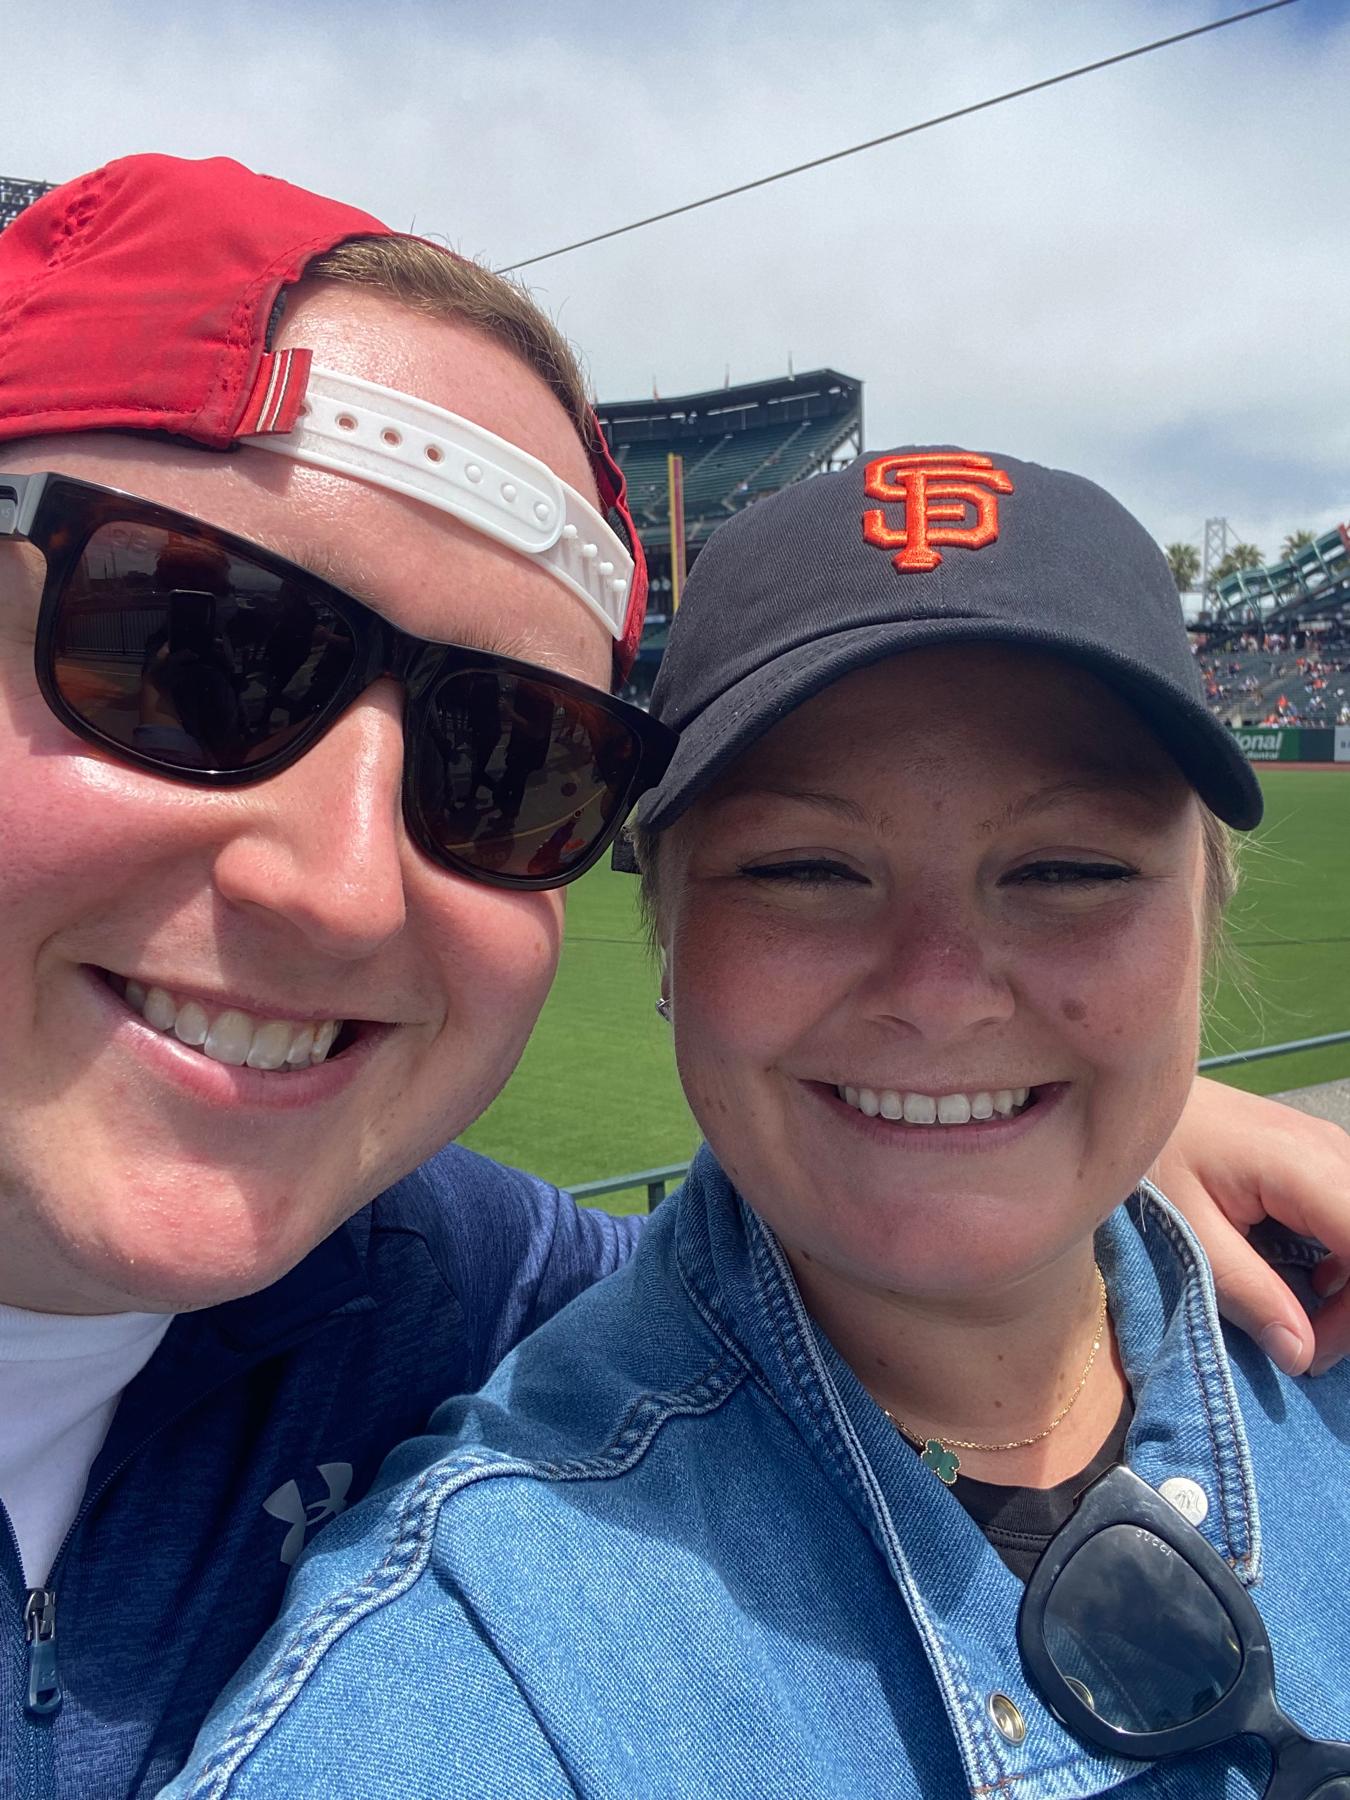 Dan & Abby's first Giants game after their big move to SF!